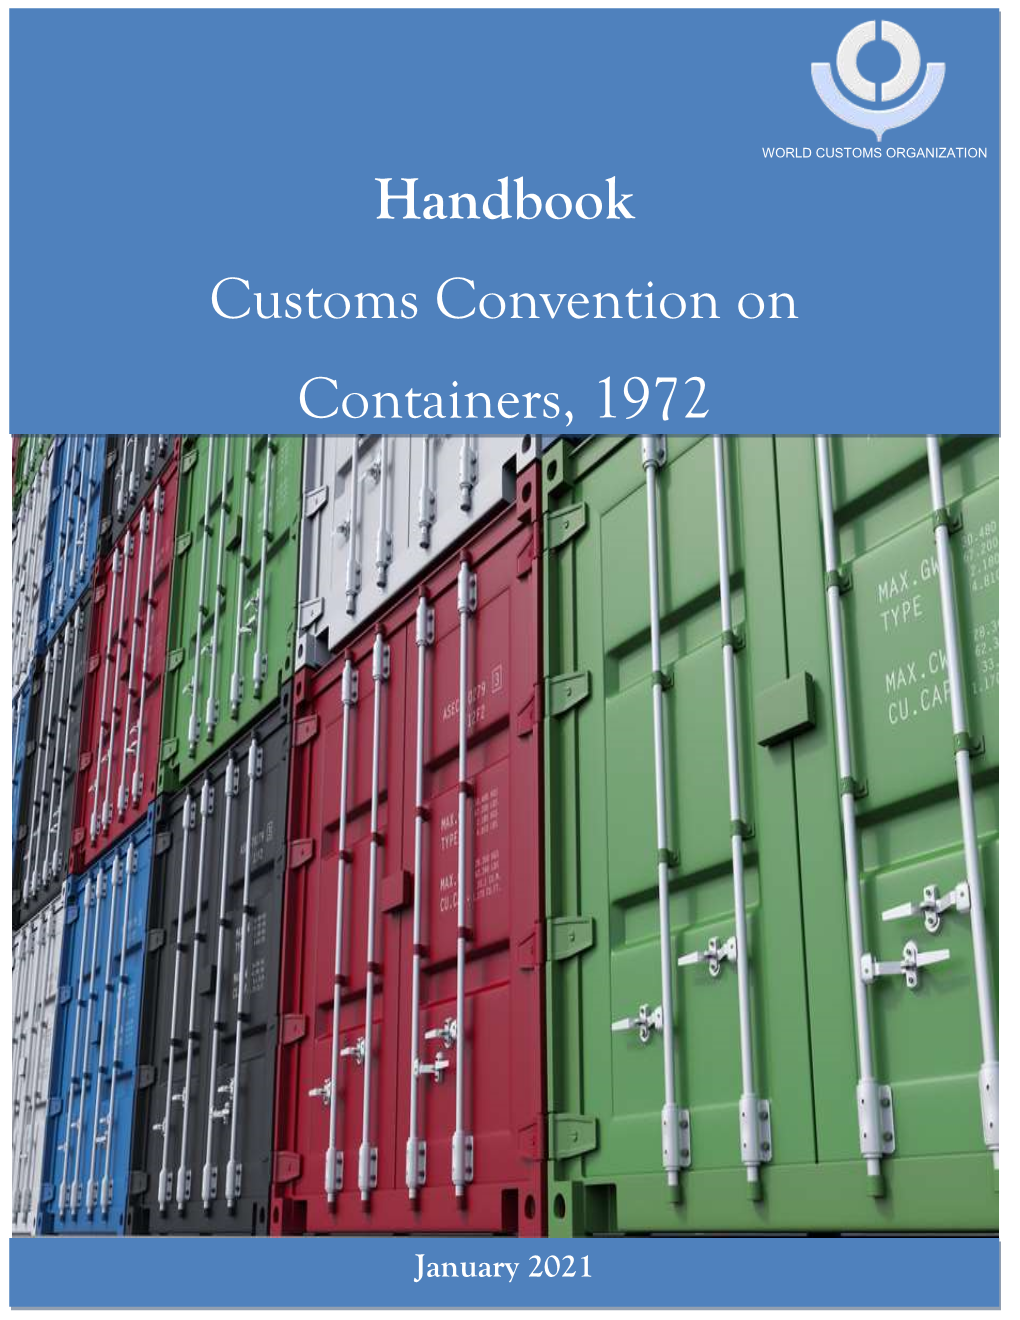 Benefits of Customs Convention on Containers